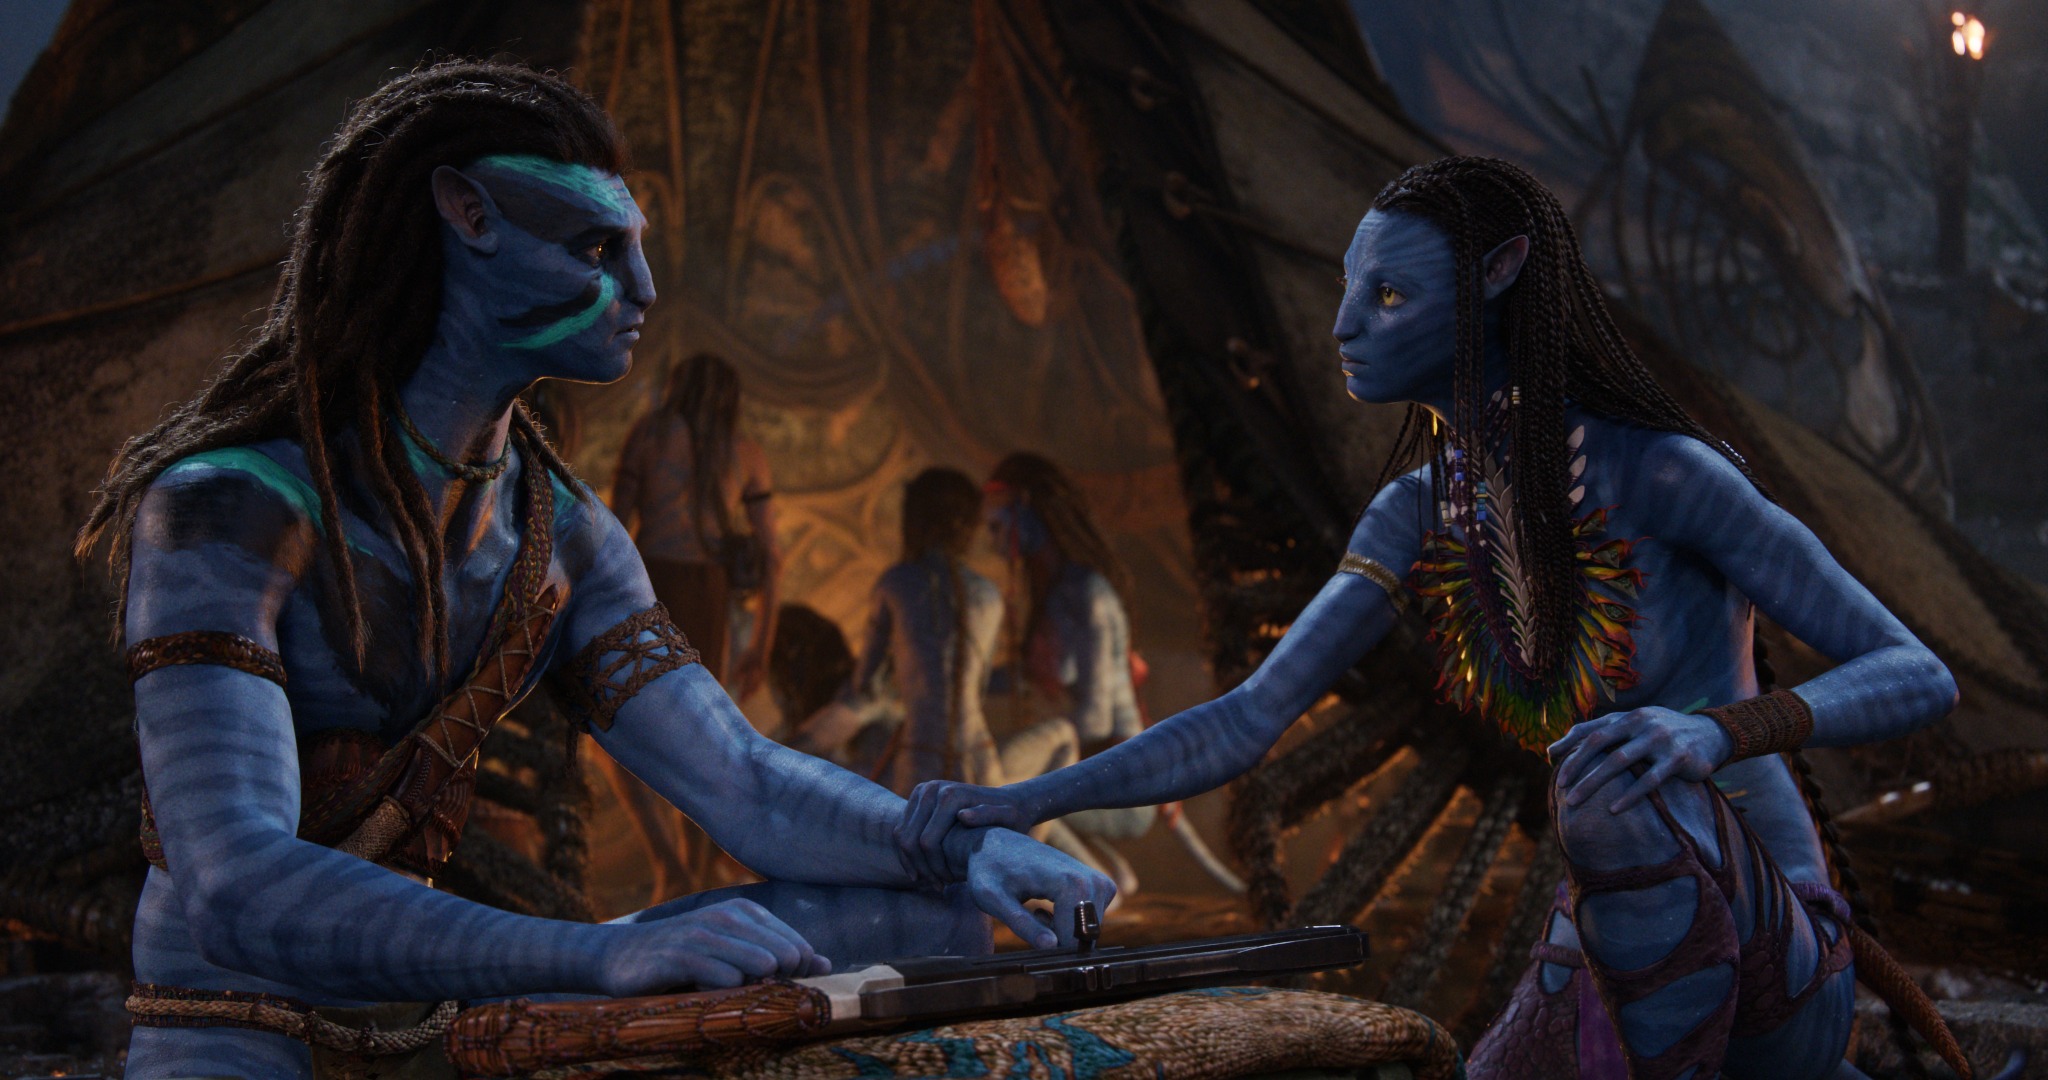 Jake Sully and Neytiri in "Avatar: The way of water". 